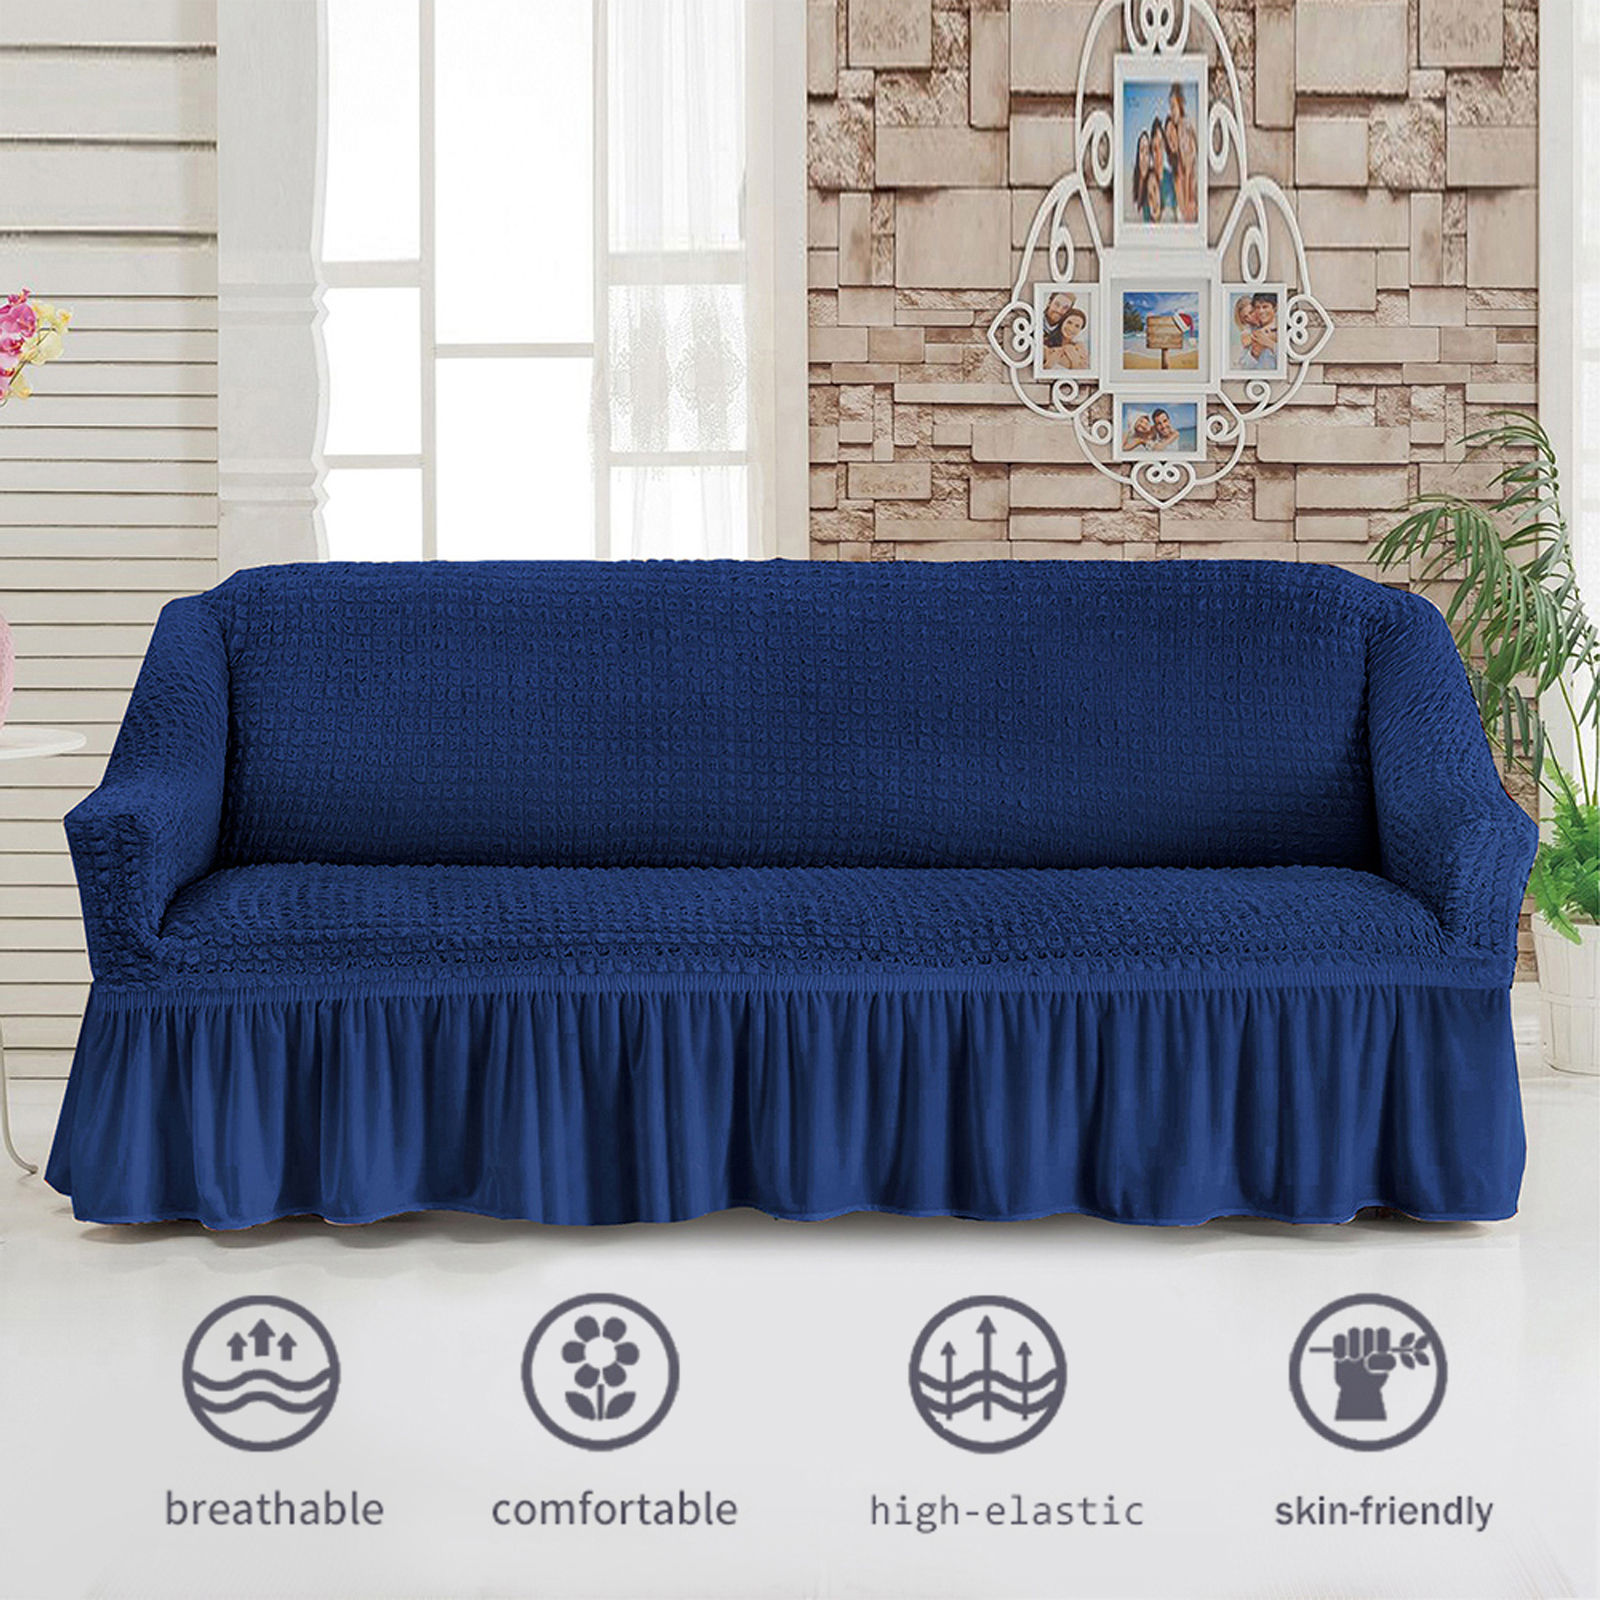 Stretch Sofa Slipcover, 3 Seater Sofa Slipcovers With Skirt With Armless Soft Sofa Cover Elastic Straps Sofa Slipcover For Living Room Kids Pets-blue-X-Large